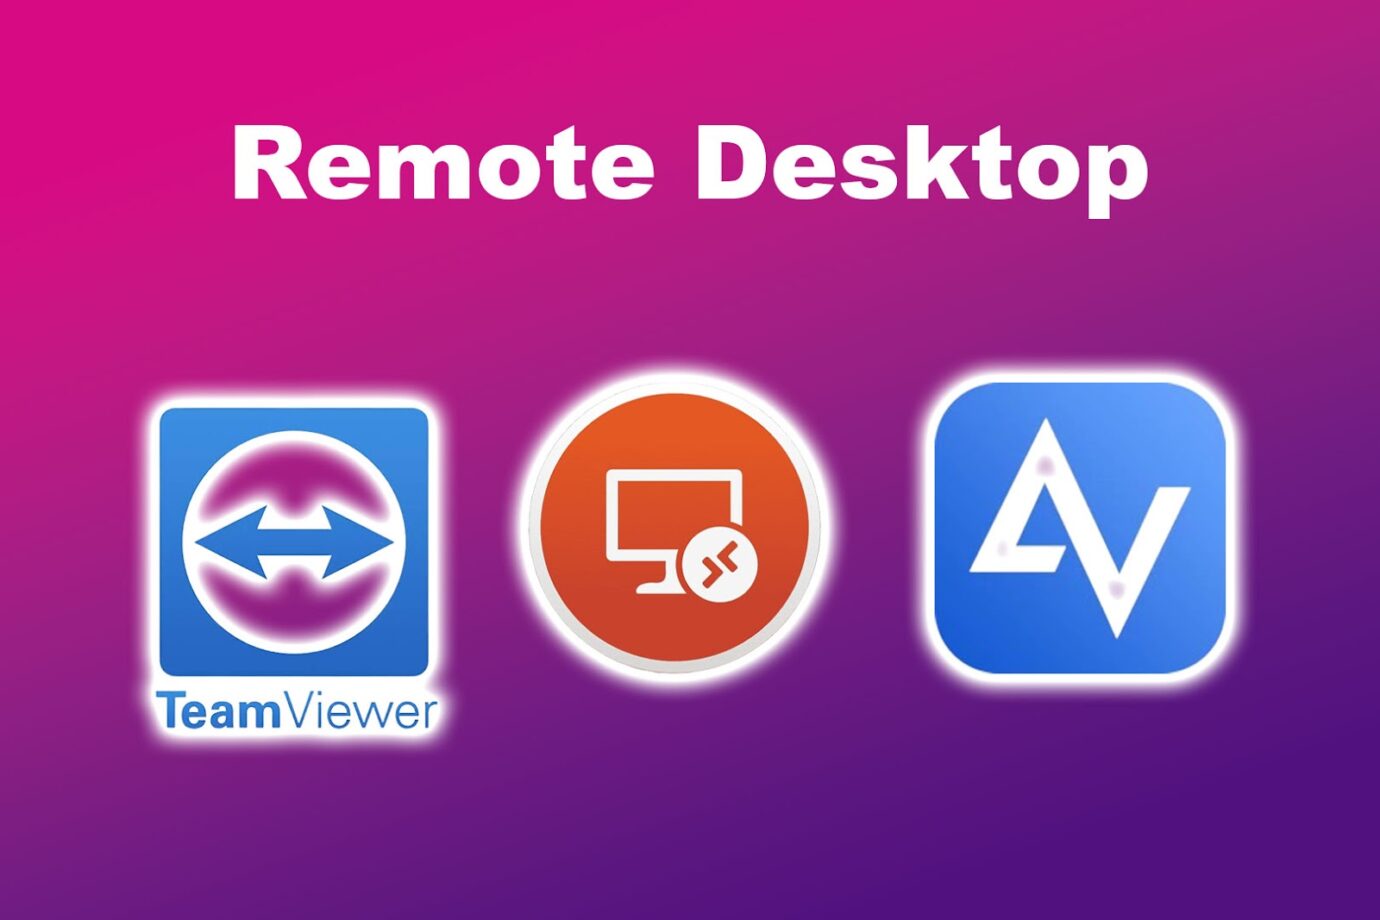 Remote Access to Files - Desktop Software